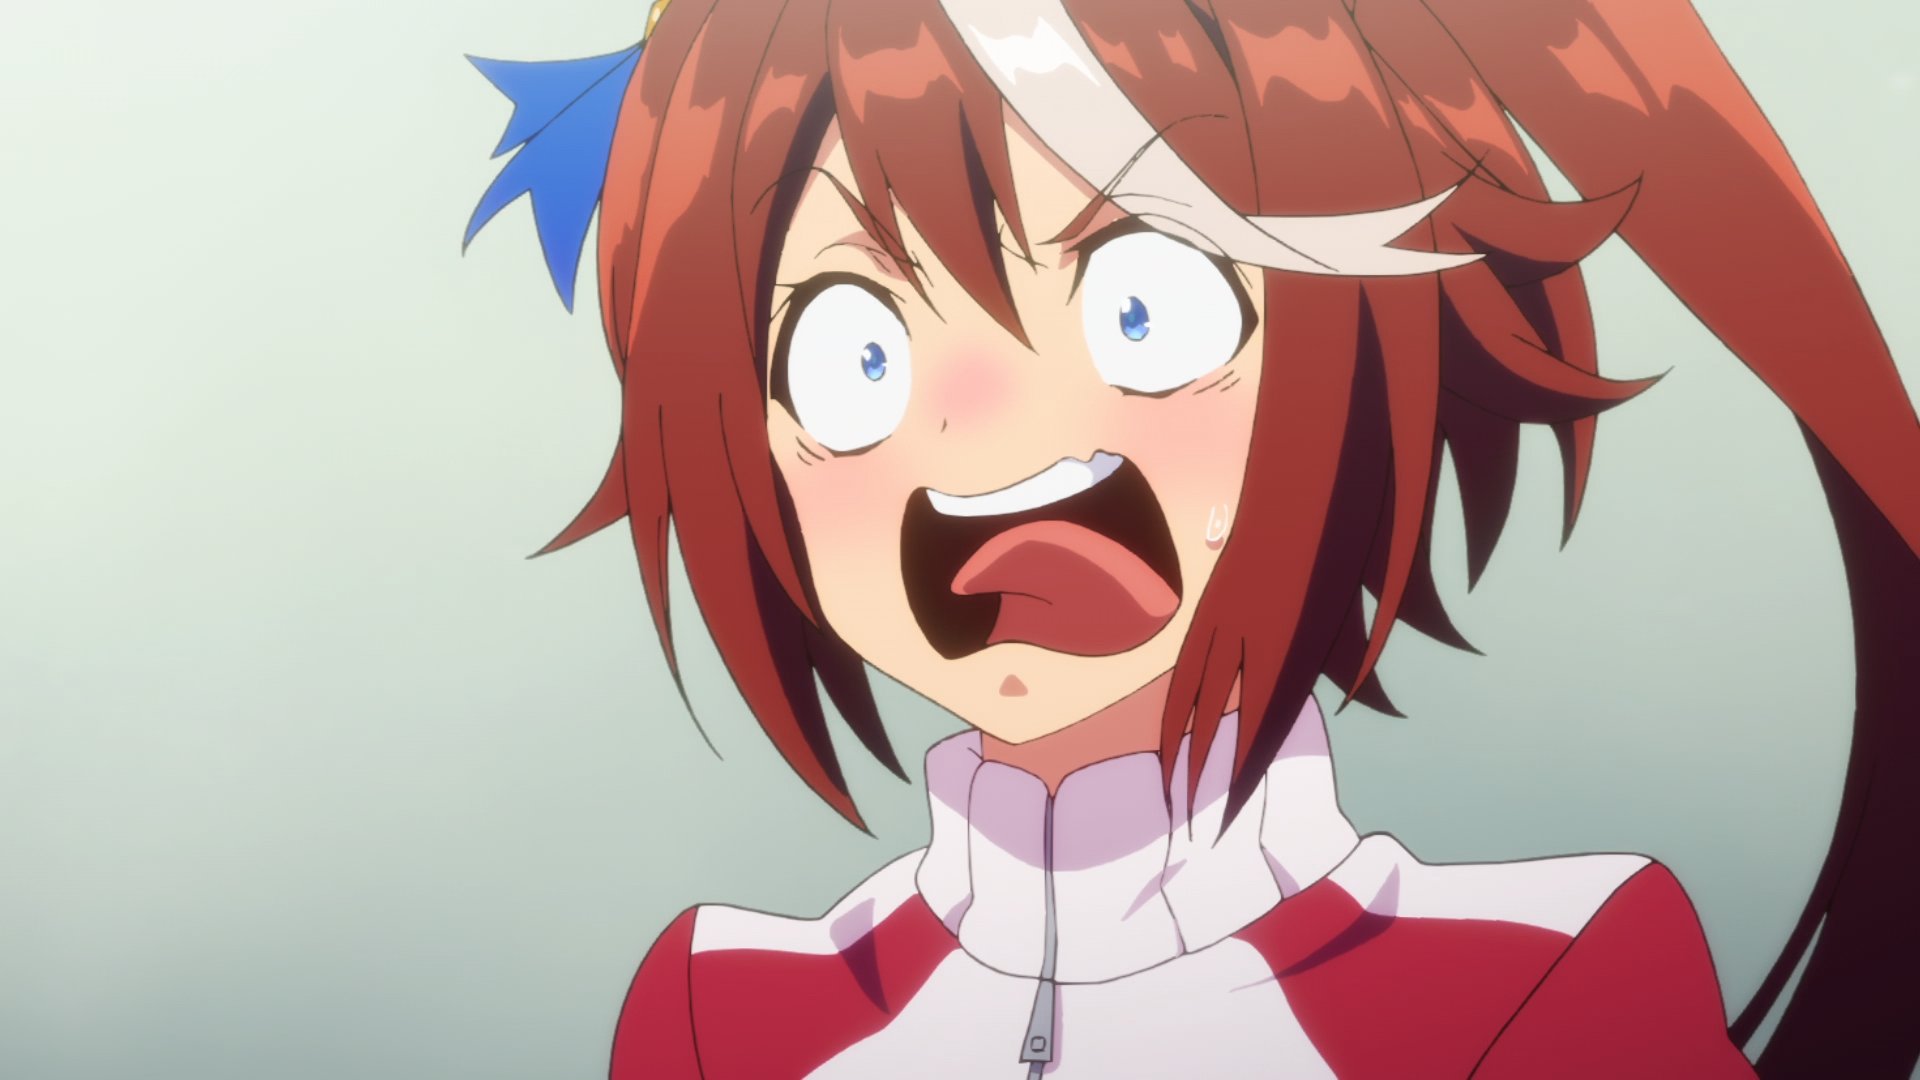 Tokai Teio screams in discomfort after receiving a sizeable shot in a scene from the second season of the Umamusume: Pretty Derby TV anime.